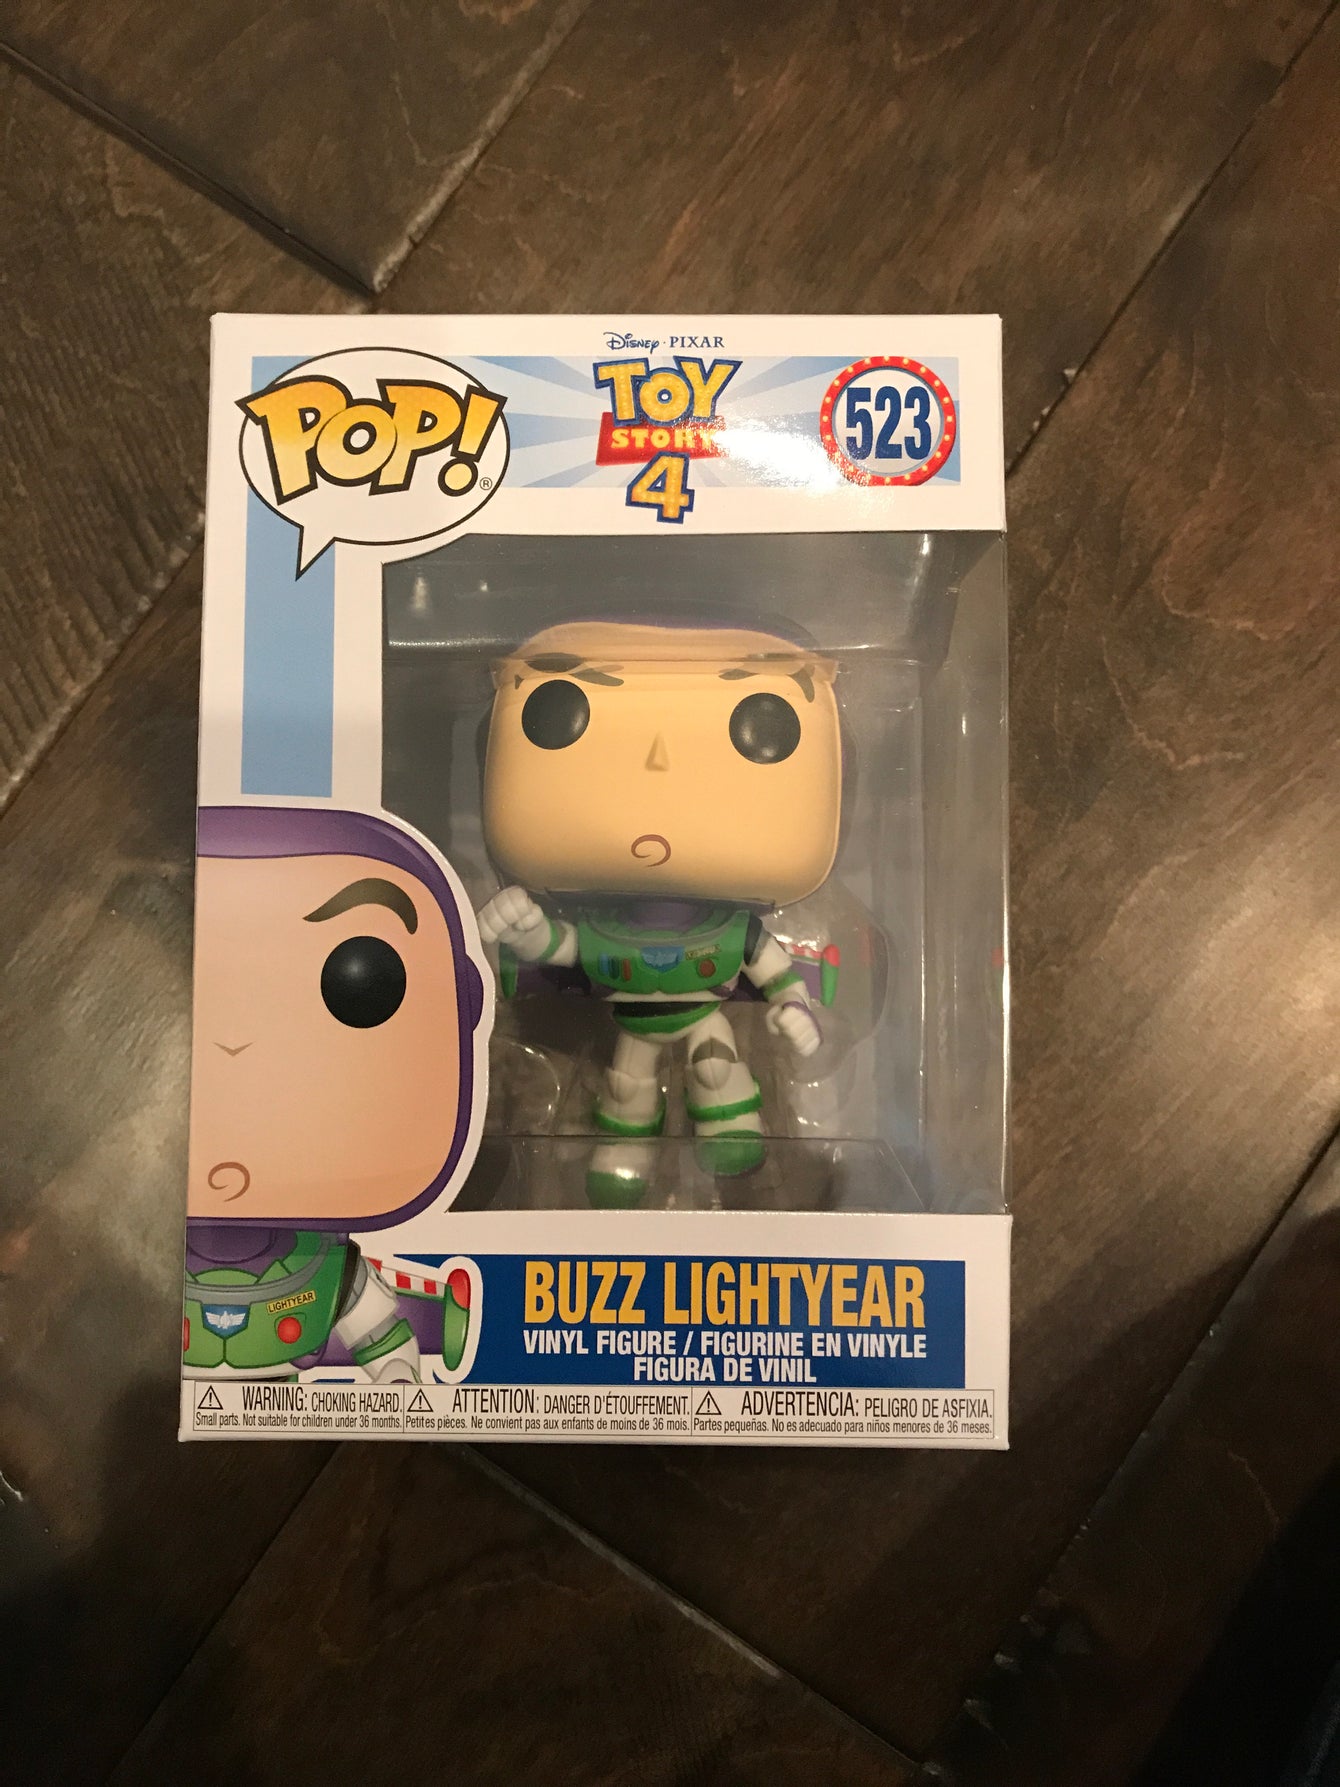 Buzz Lightyear mint condition LC4